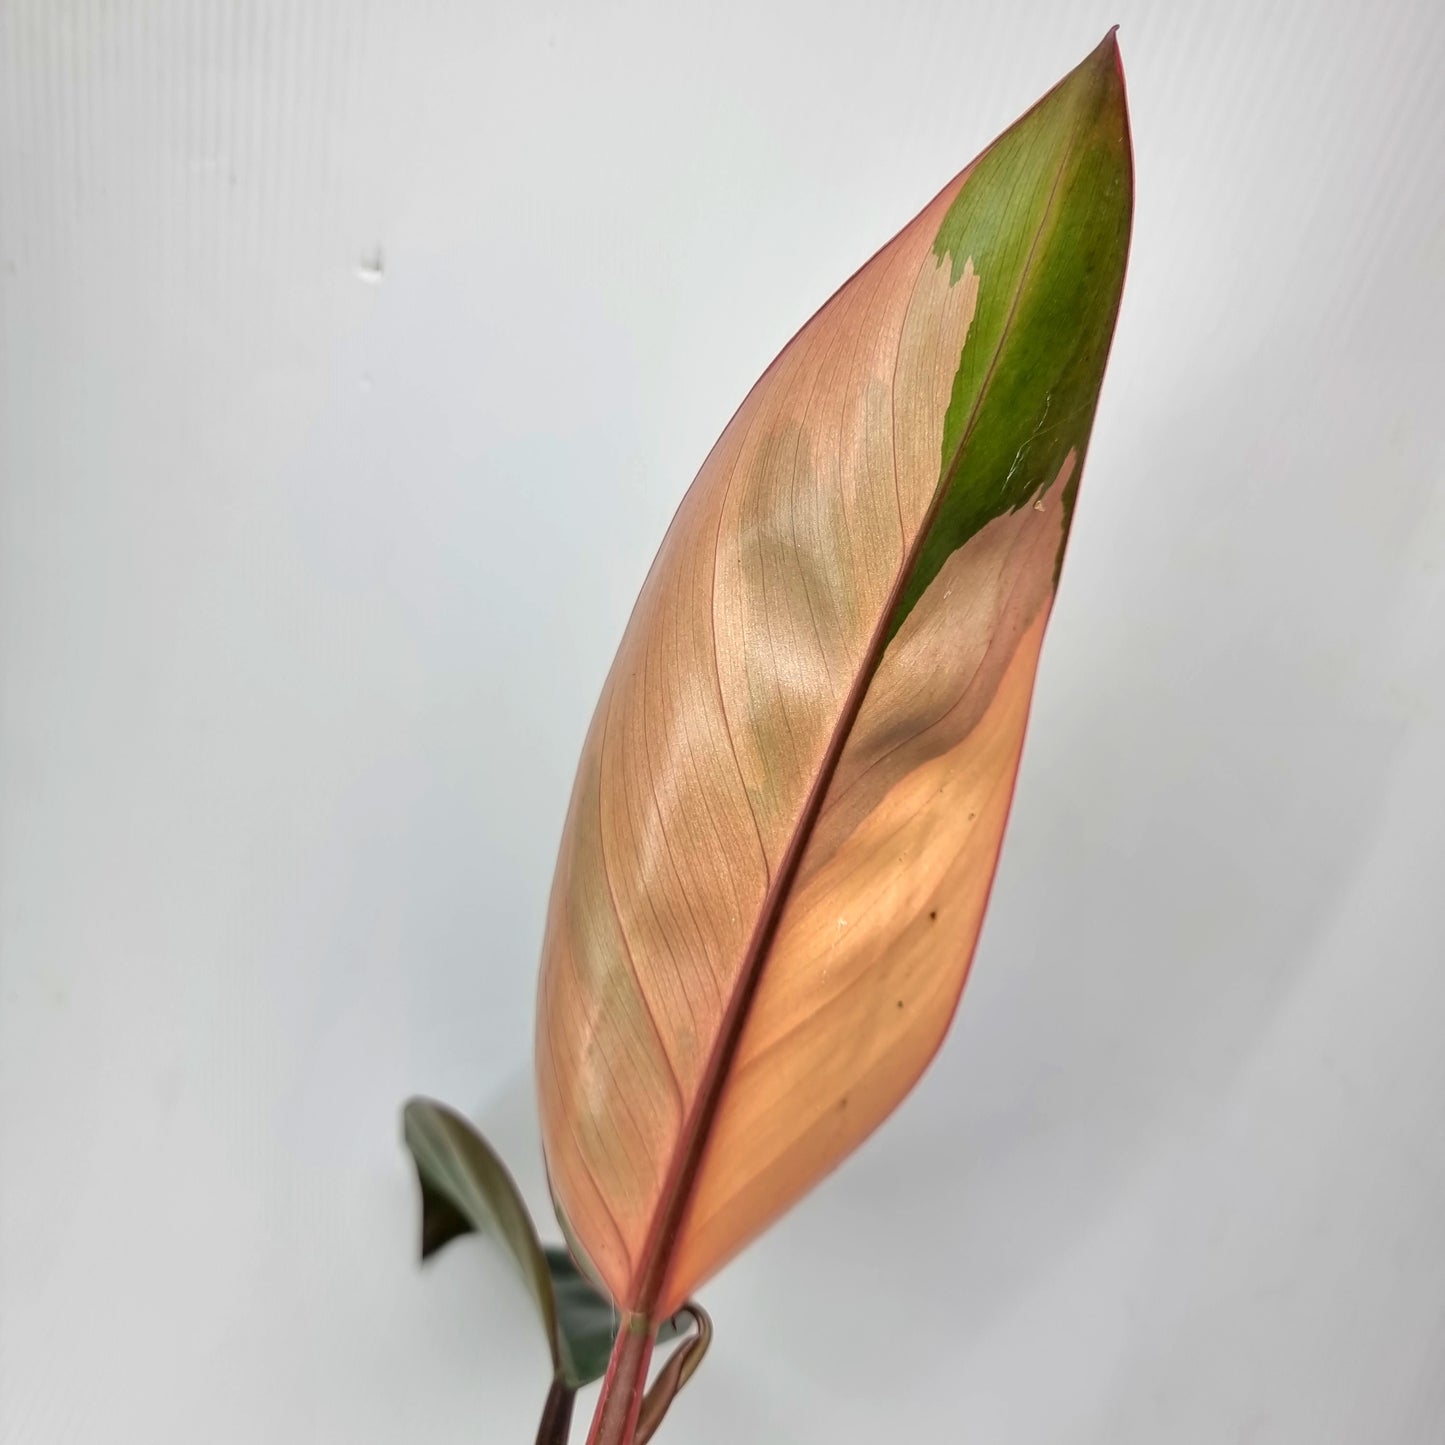 rare Philodendron Red congo variegated for sale in Perth Australia